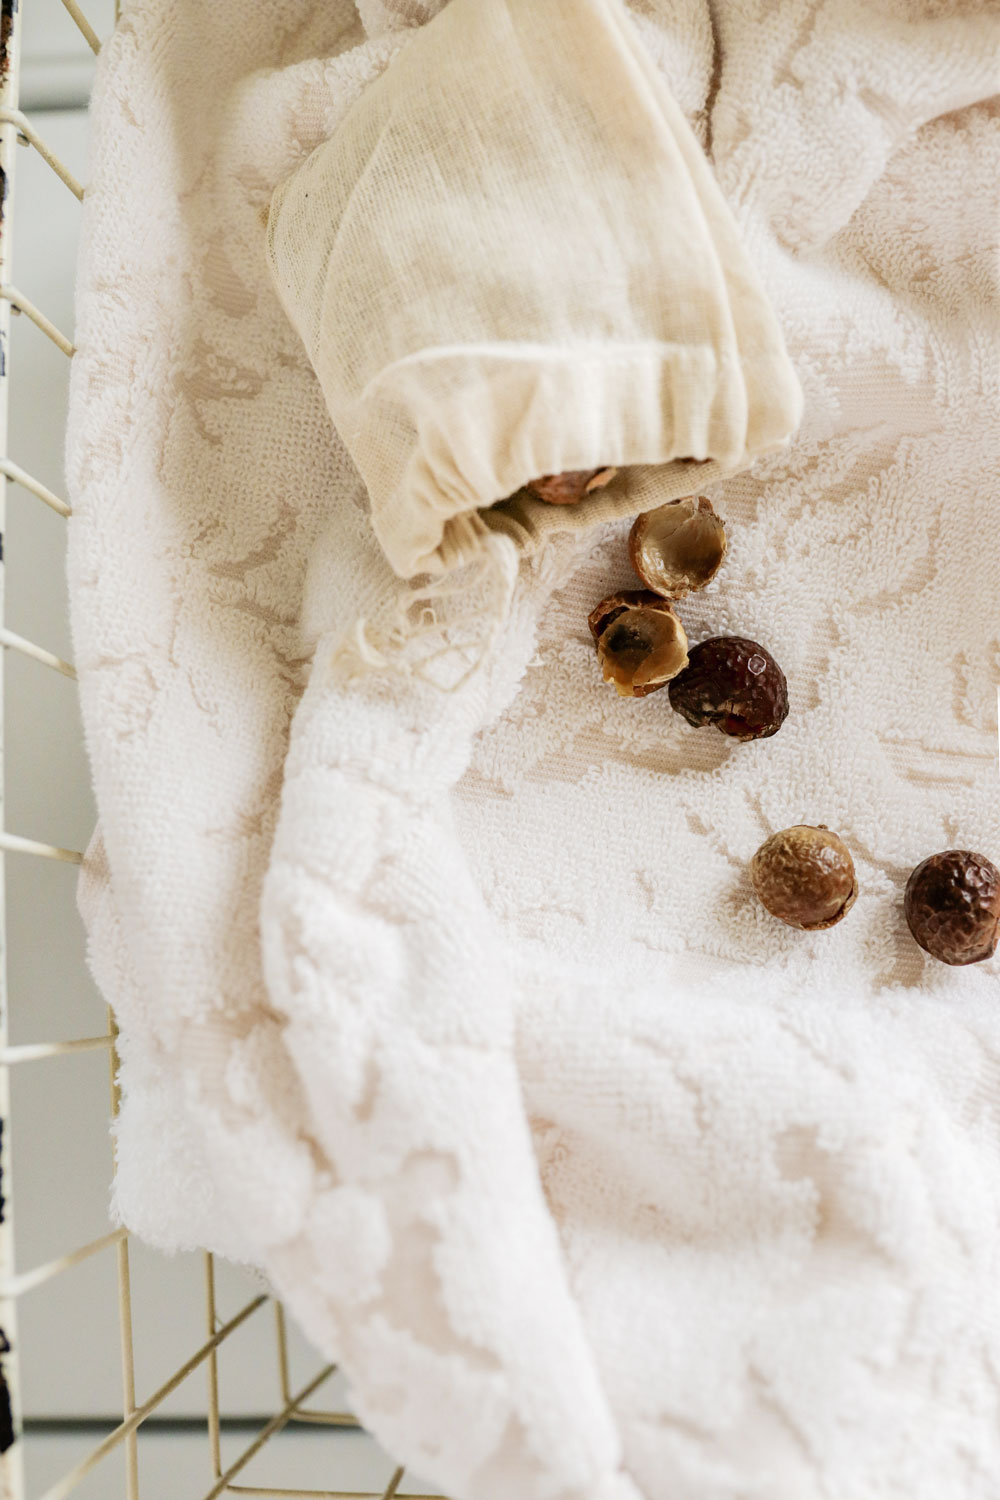 How to use soap nuts